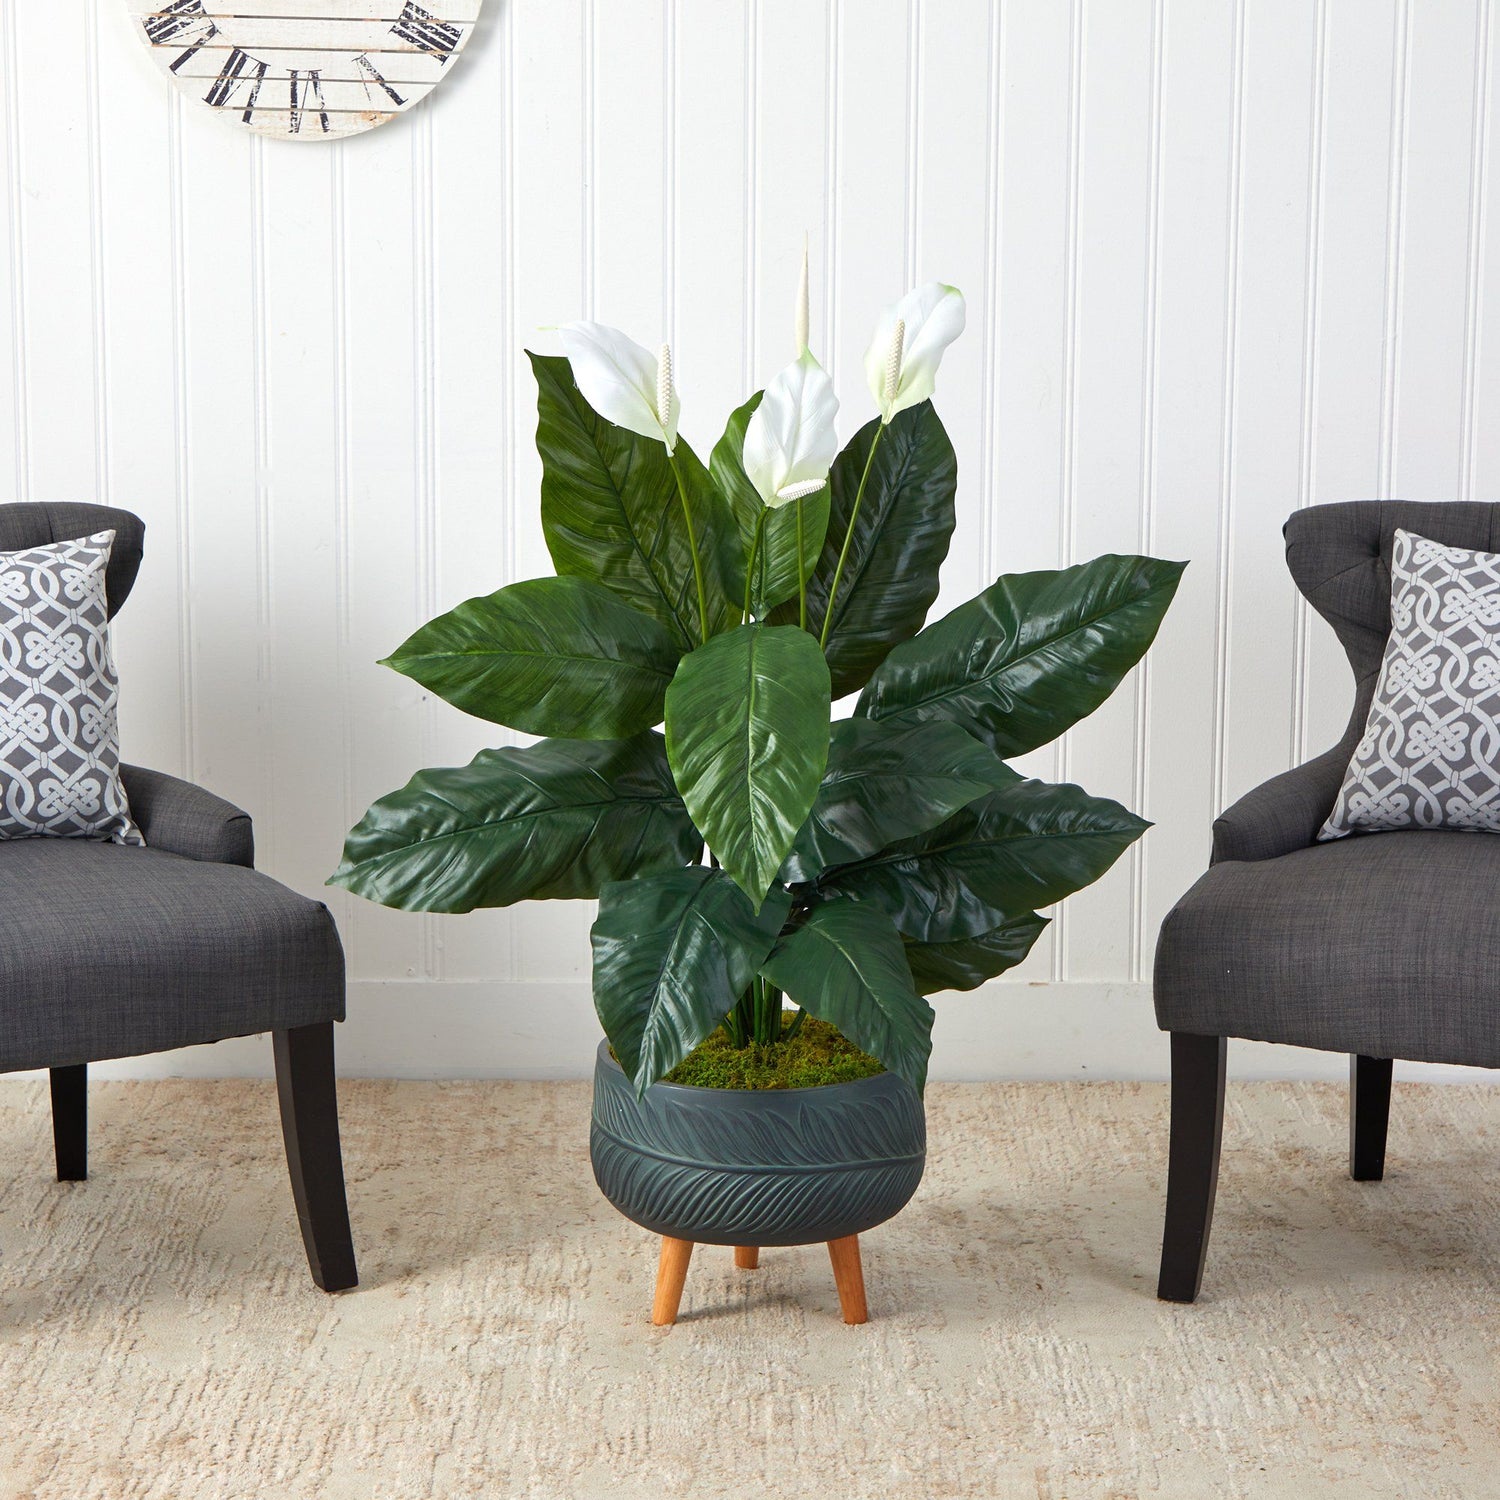 4’ Spathiphyllum Artificial Plant in Black Planter with Stand